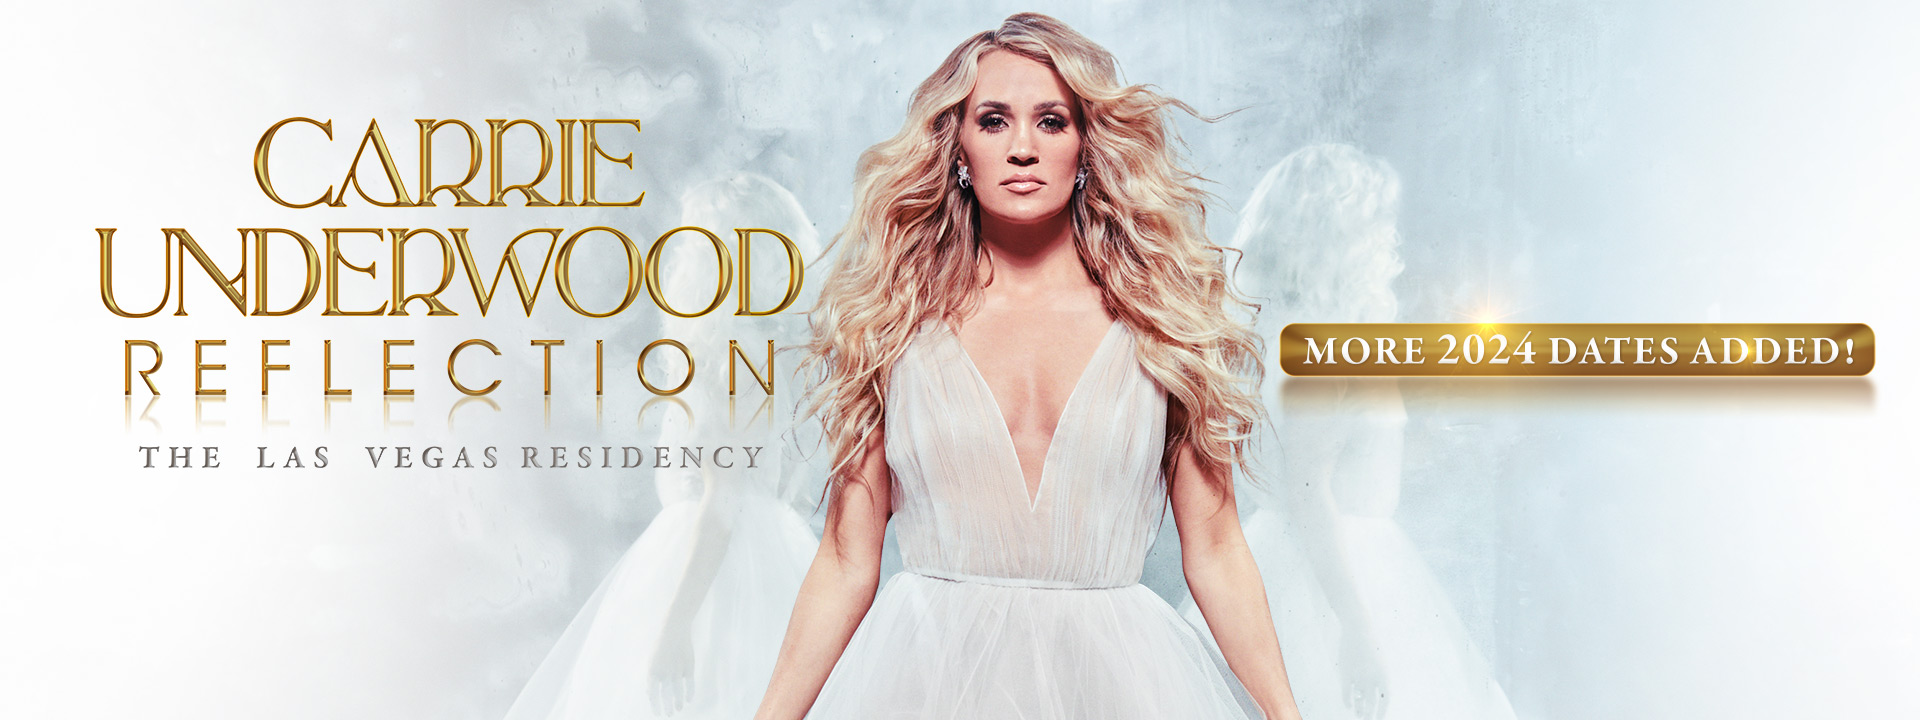 Carrie Underwood Reflection, THE LAS VEGAS RESIDENCY MORE 2024 DATES ADDED